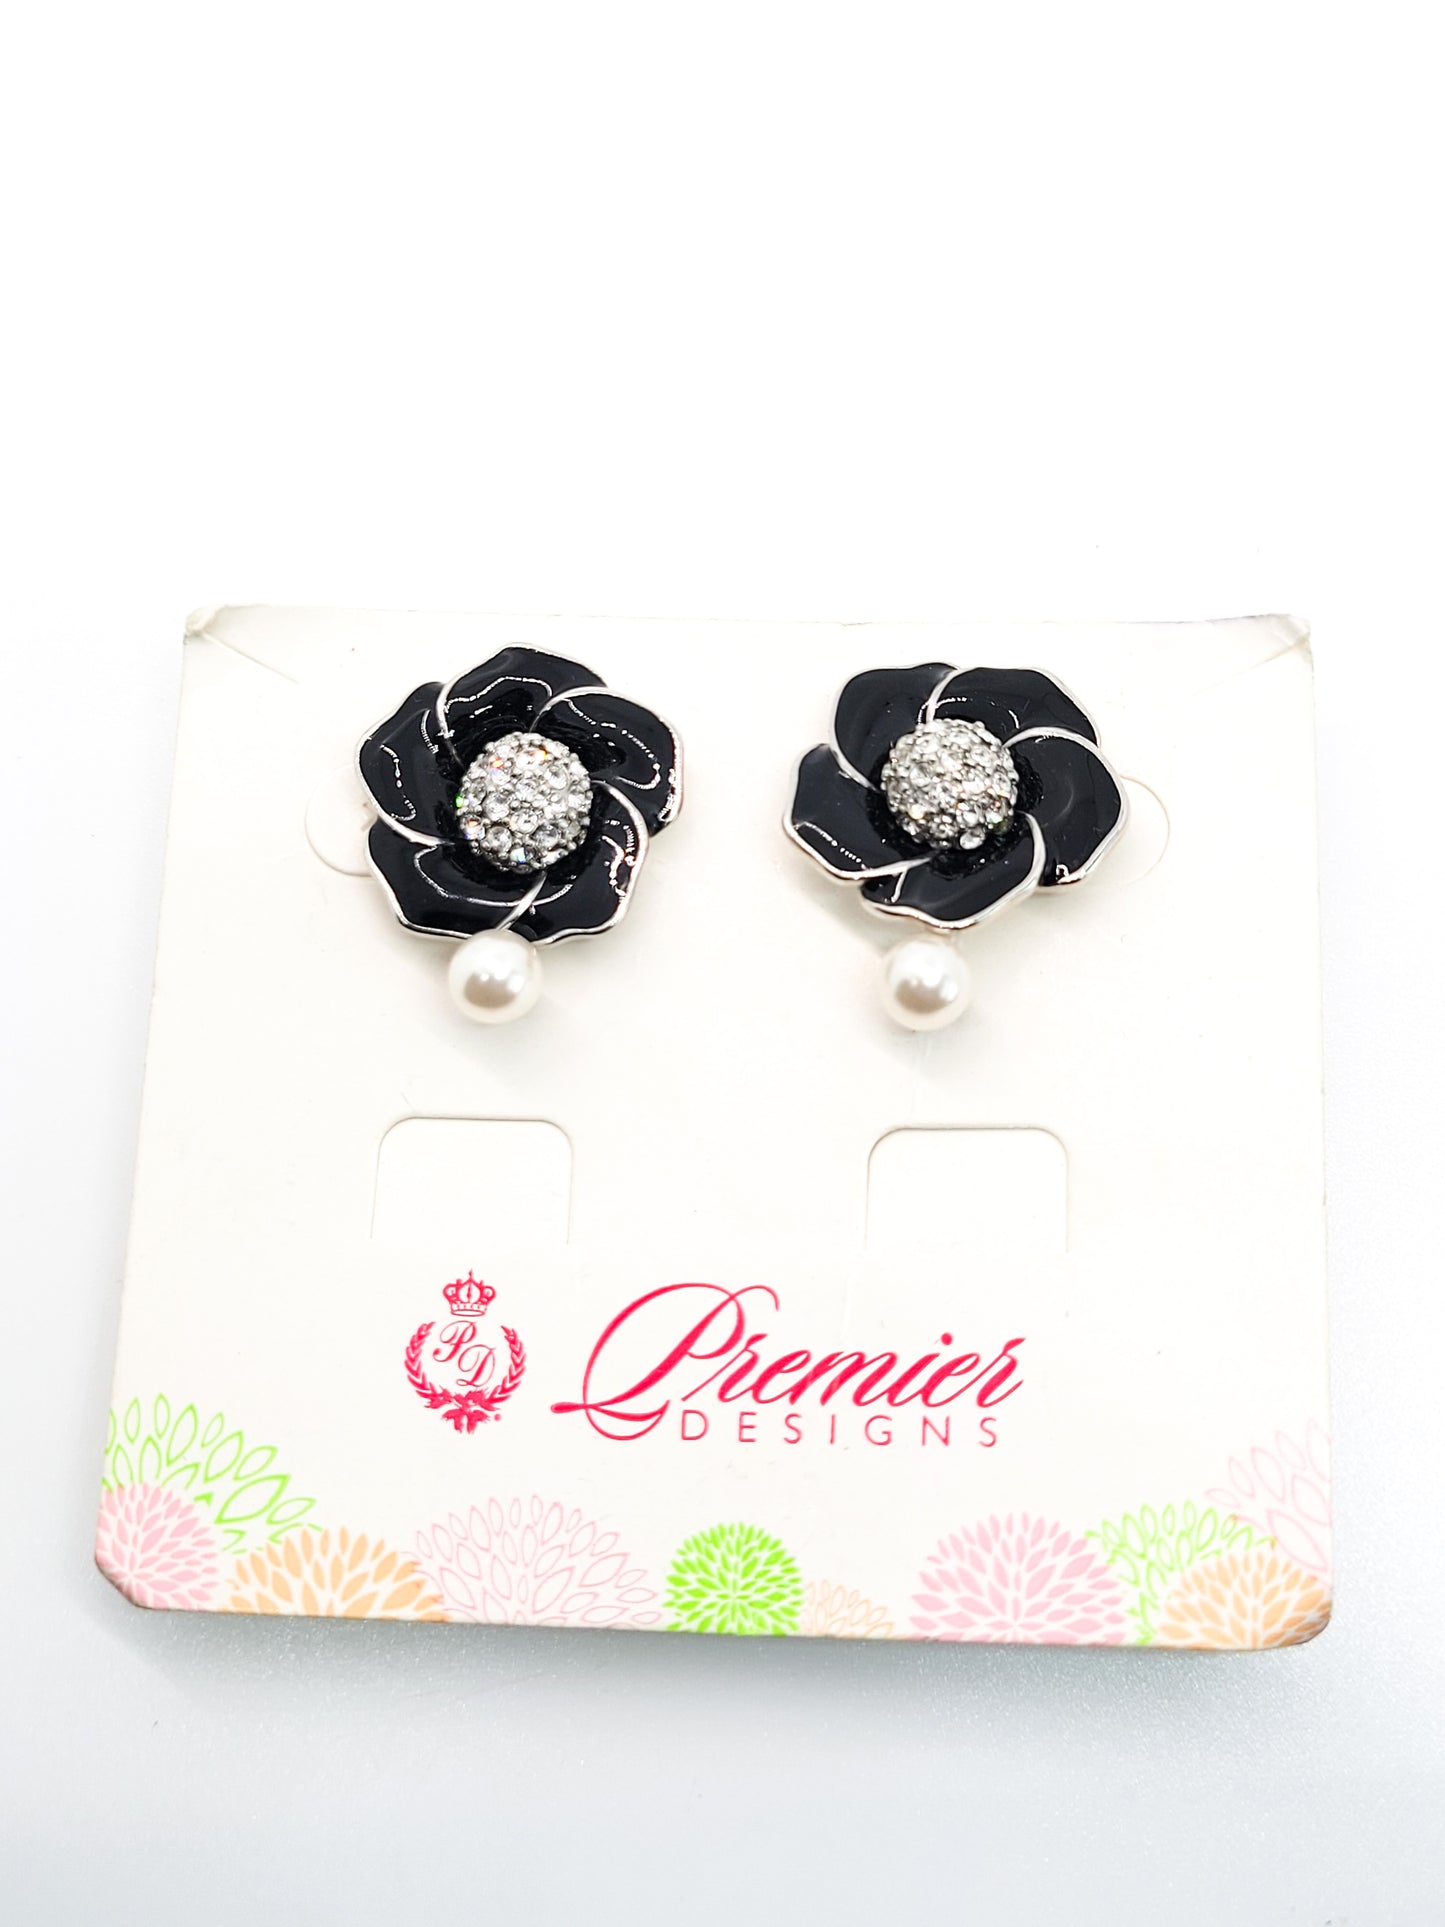 Premier Designs carded NWT Cute as a button changeable flower earrings #30887